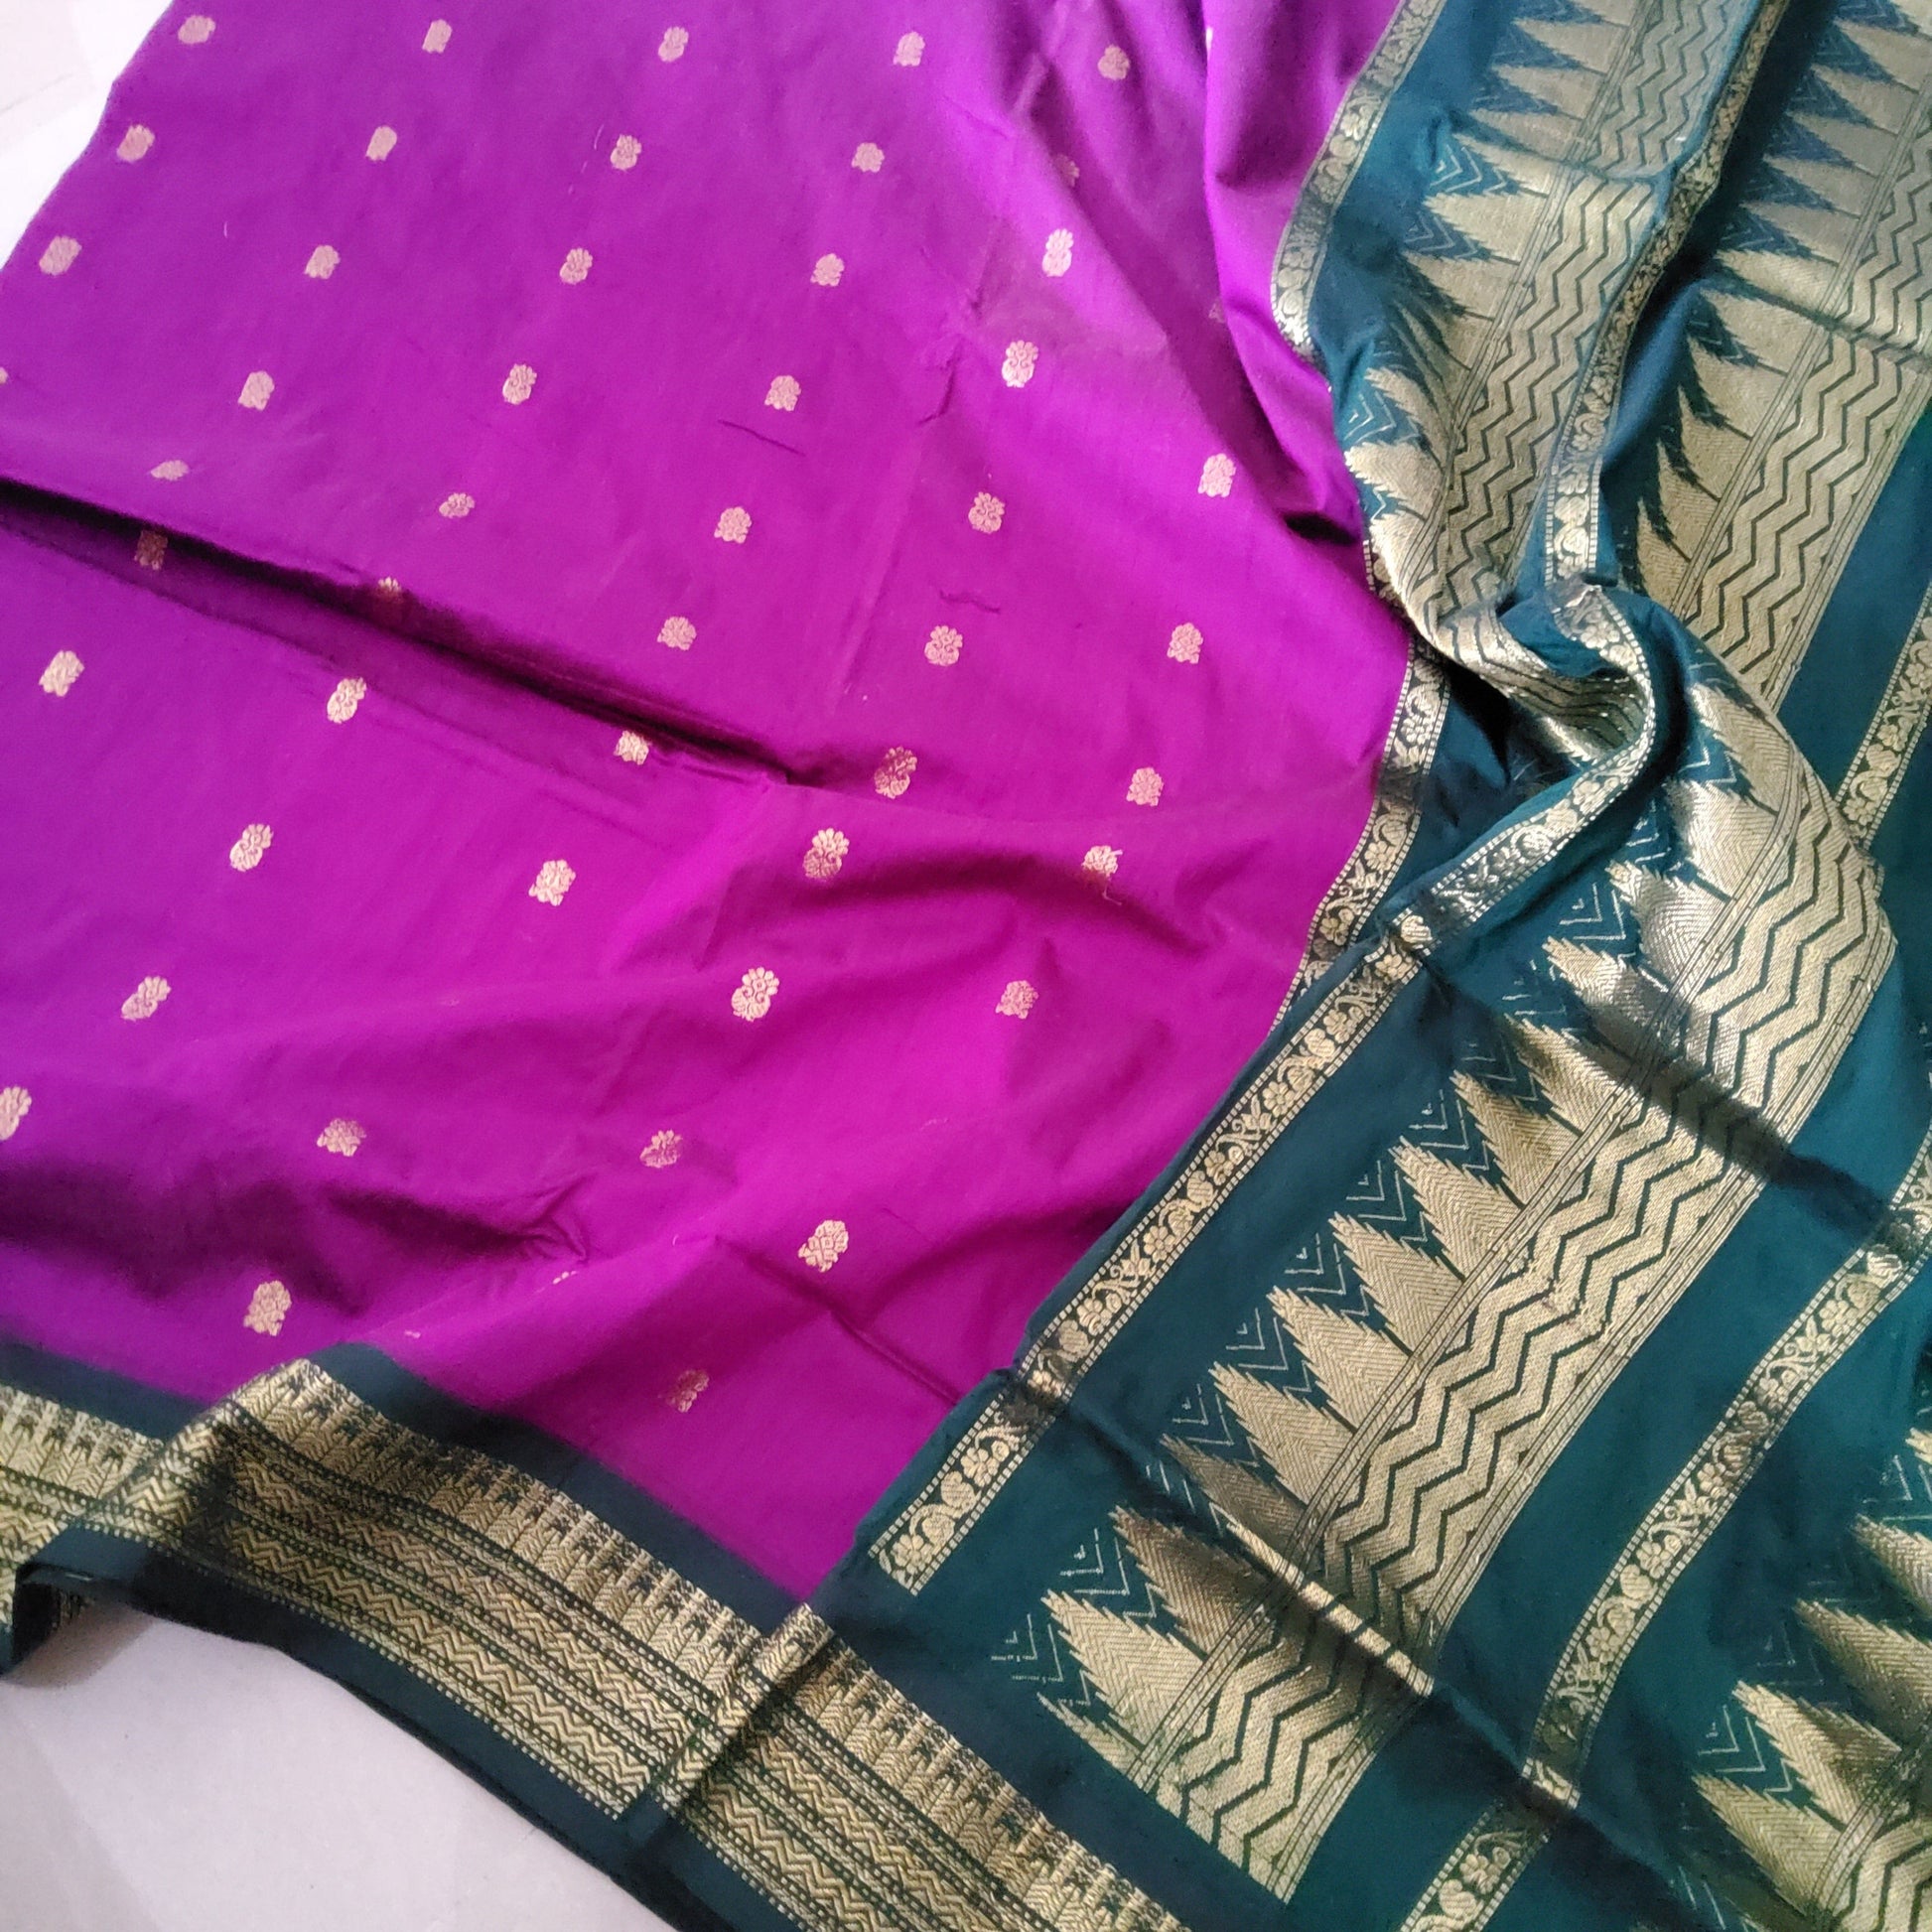 Gadhwal Cotton Saree with Contrast Blouse